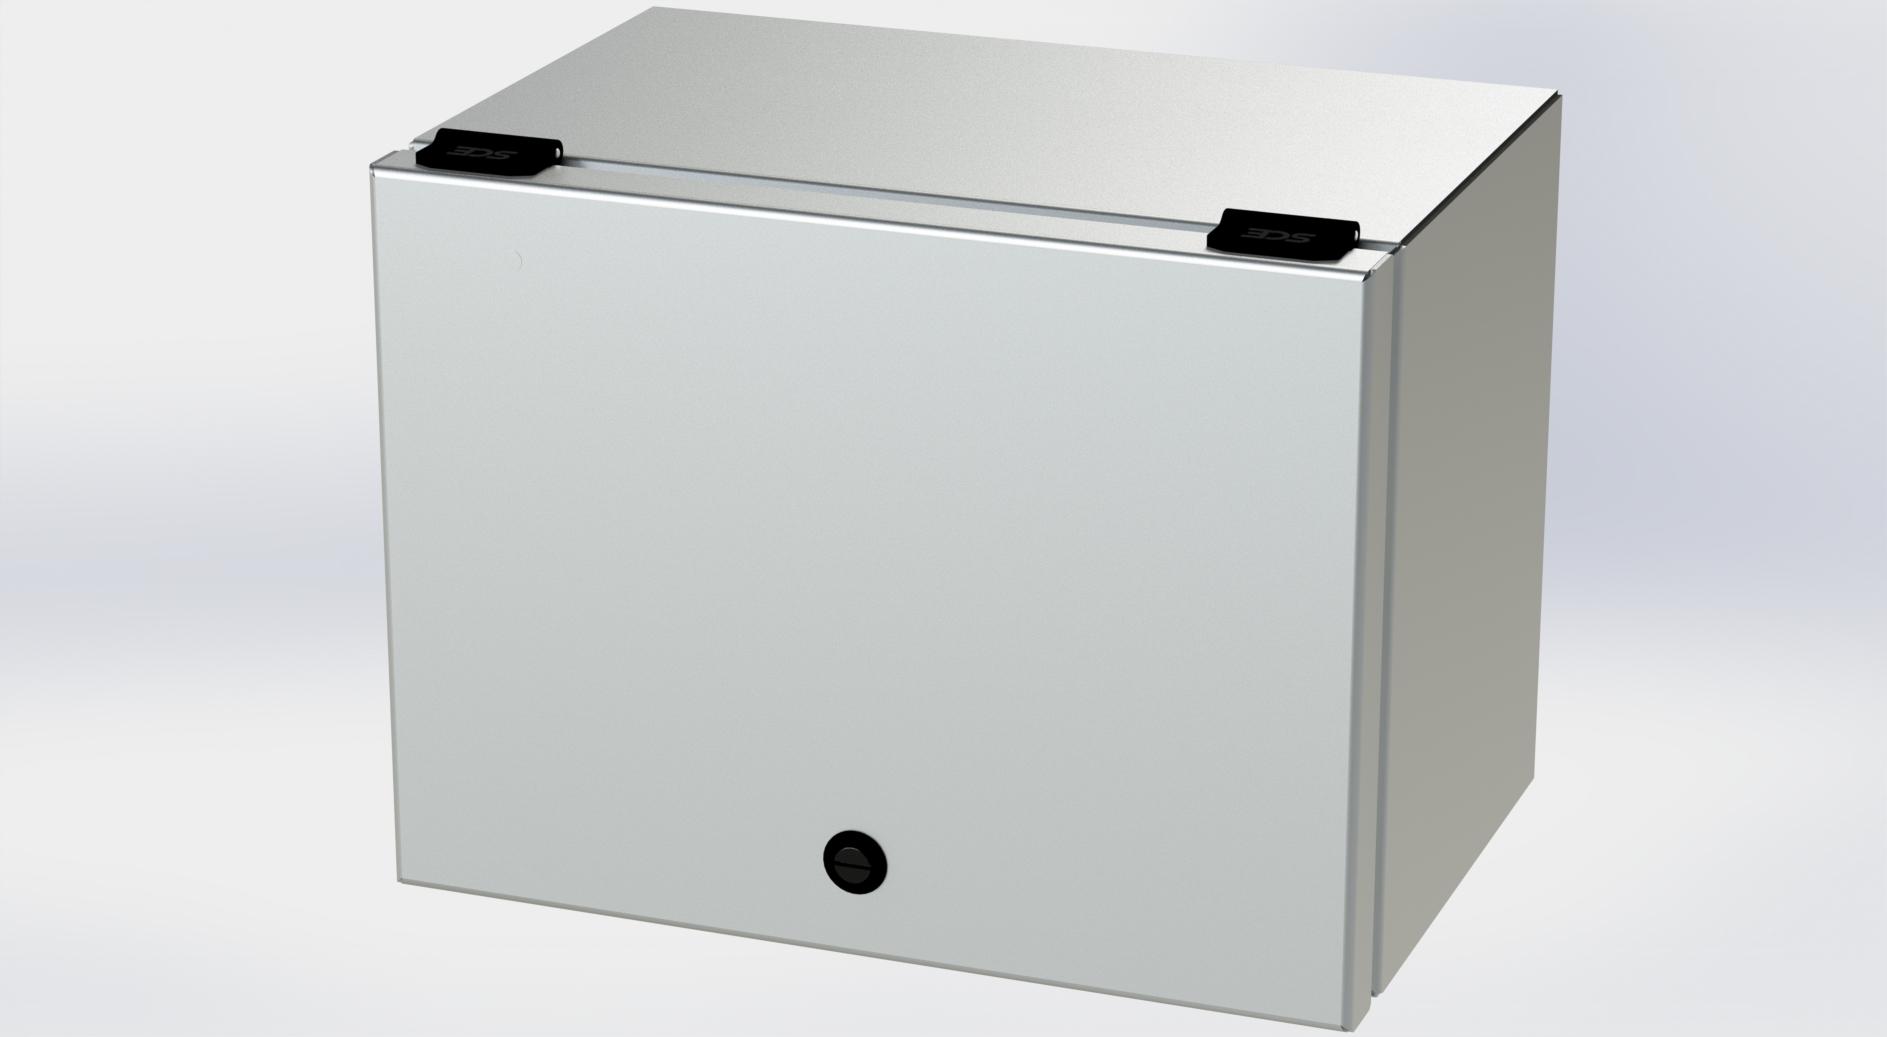 Saginaw Control SCE-L9128ELJSS S.S. ELJ Trough Enclosure, Height:9.00", Width:12.00", Depth:8.00", #4 brushed finish on all exterior surfaces. Optional sub-panels are powder coated white.